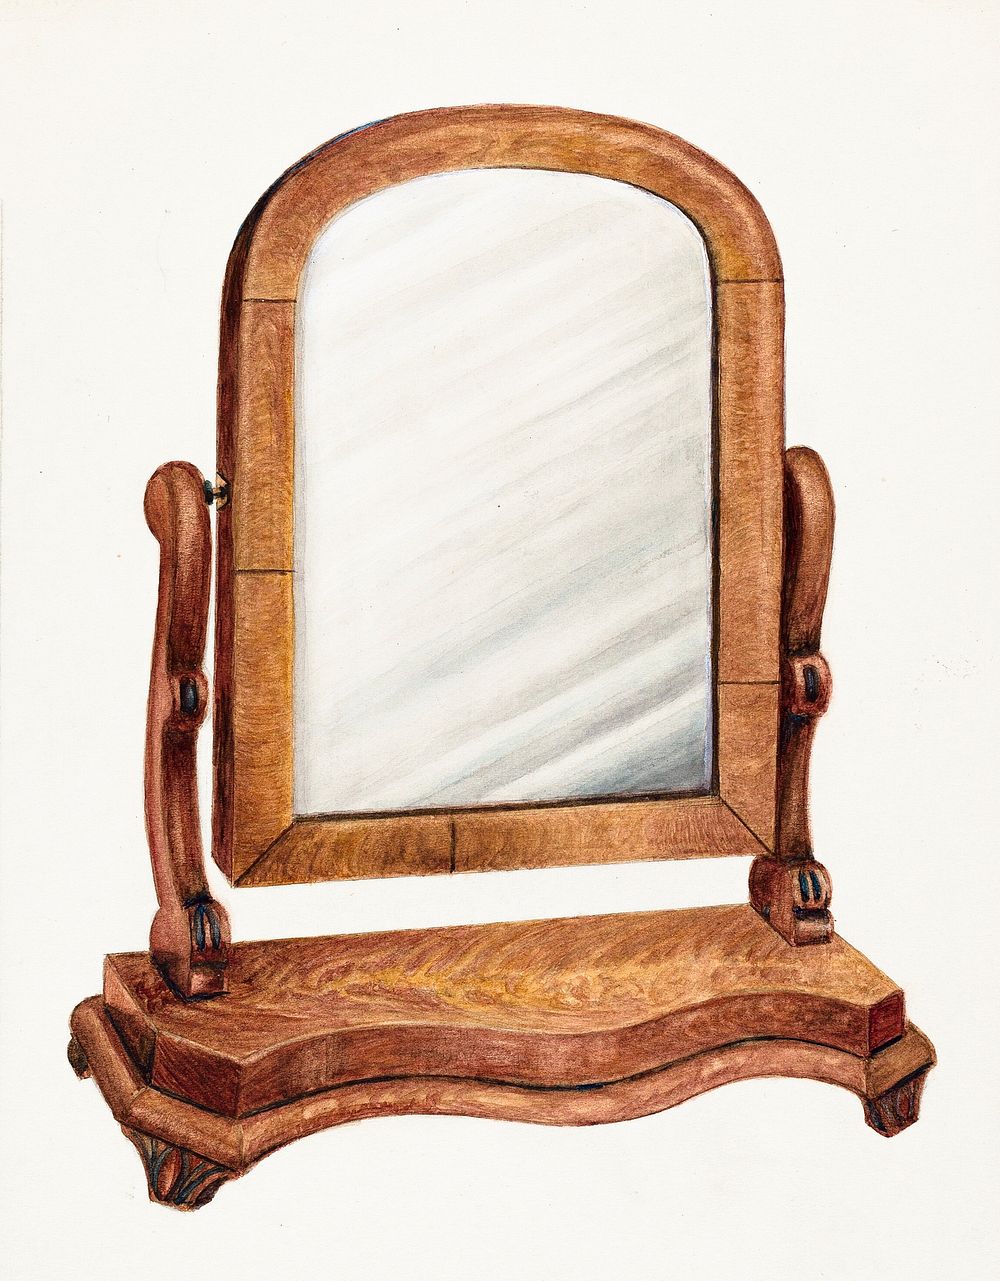 Mirror with Wood Base (ca.1937) by Thomas Holloway. Original from The National Gallery of Art. Digitally enhanced by…